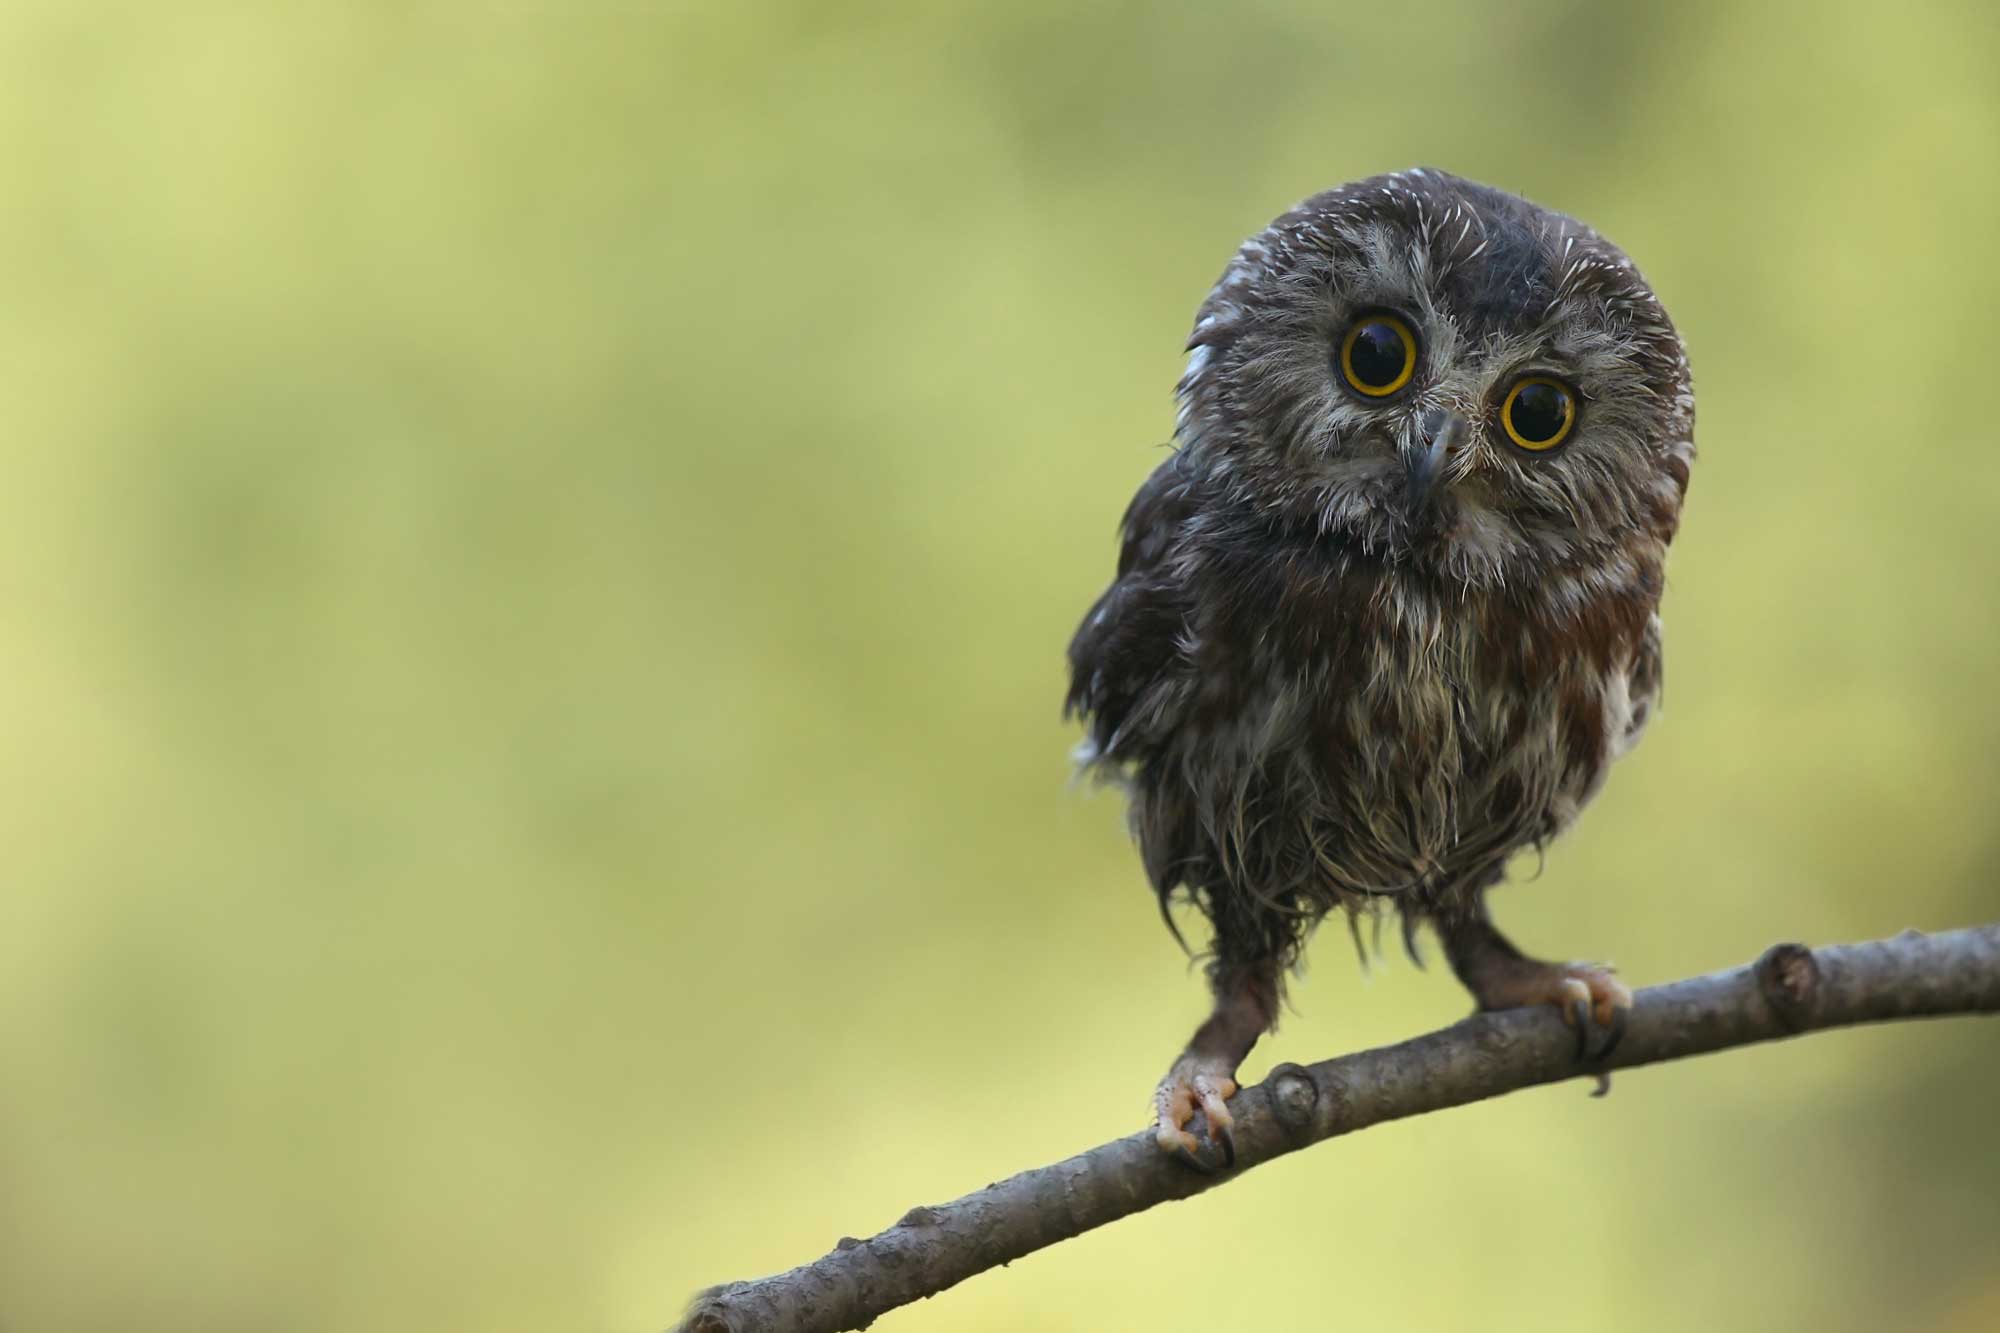 Northern saw-whet owls